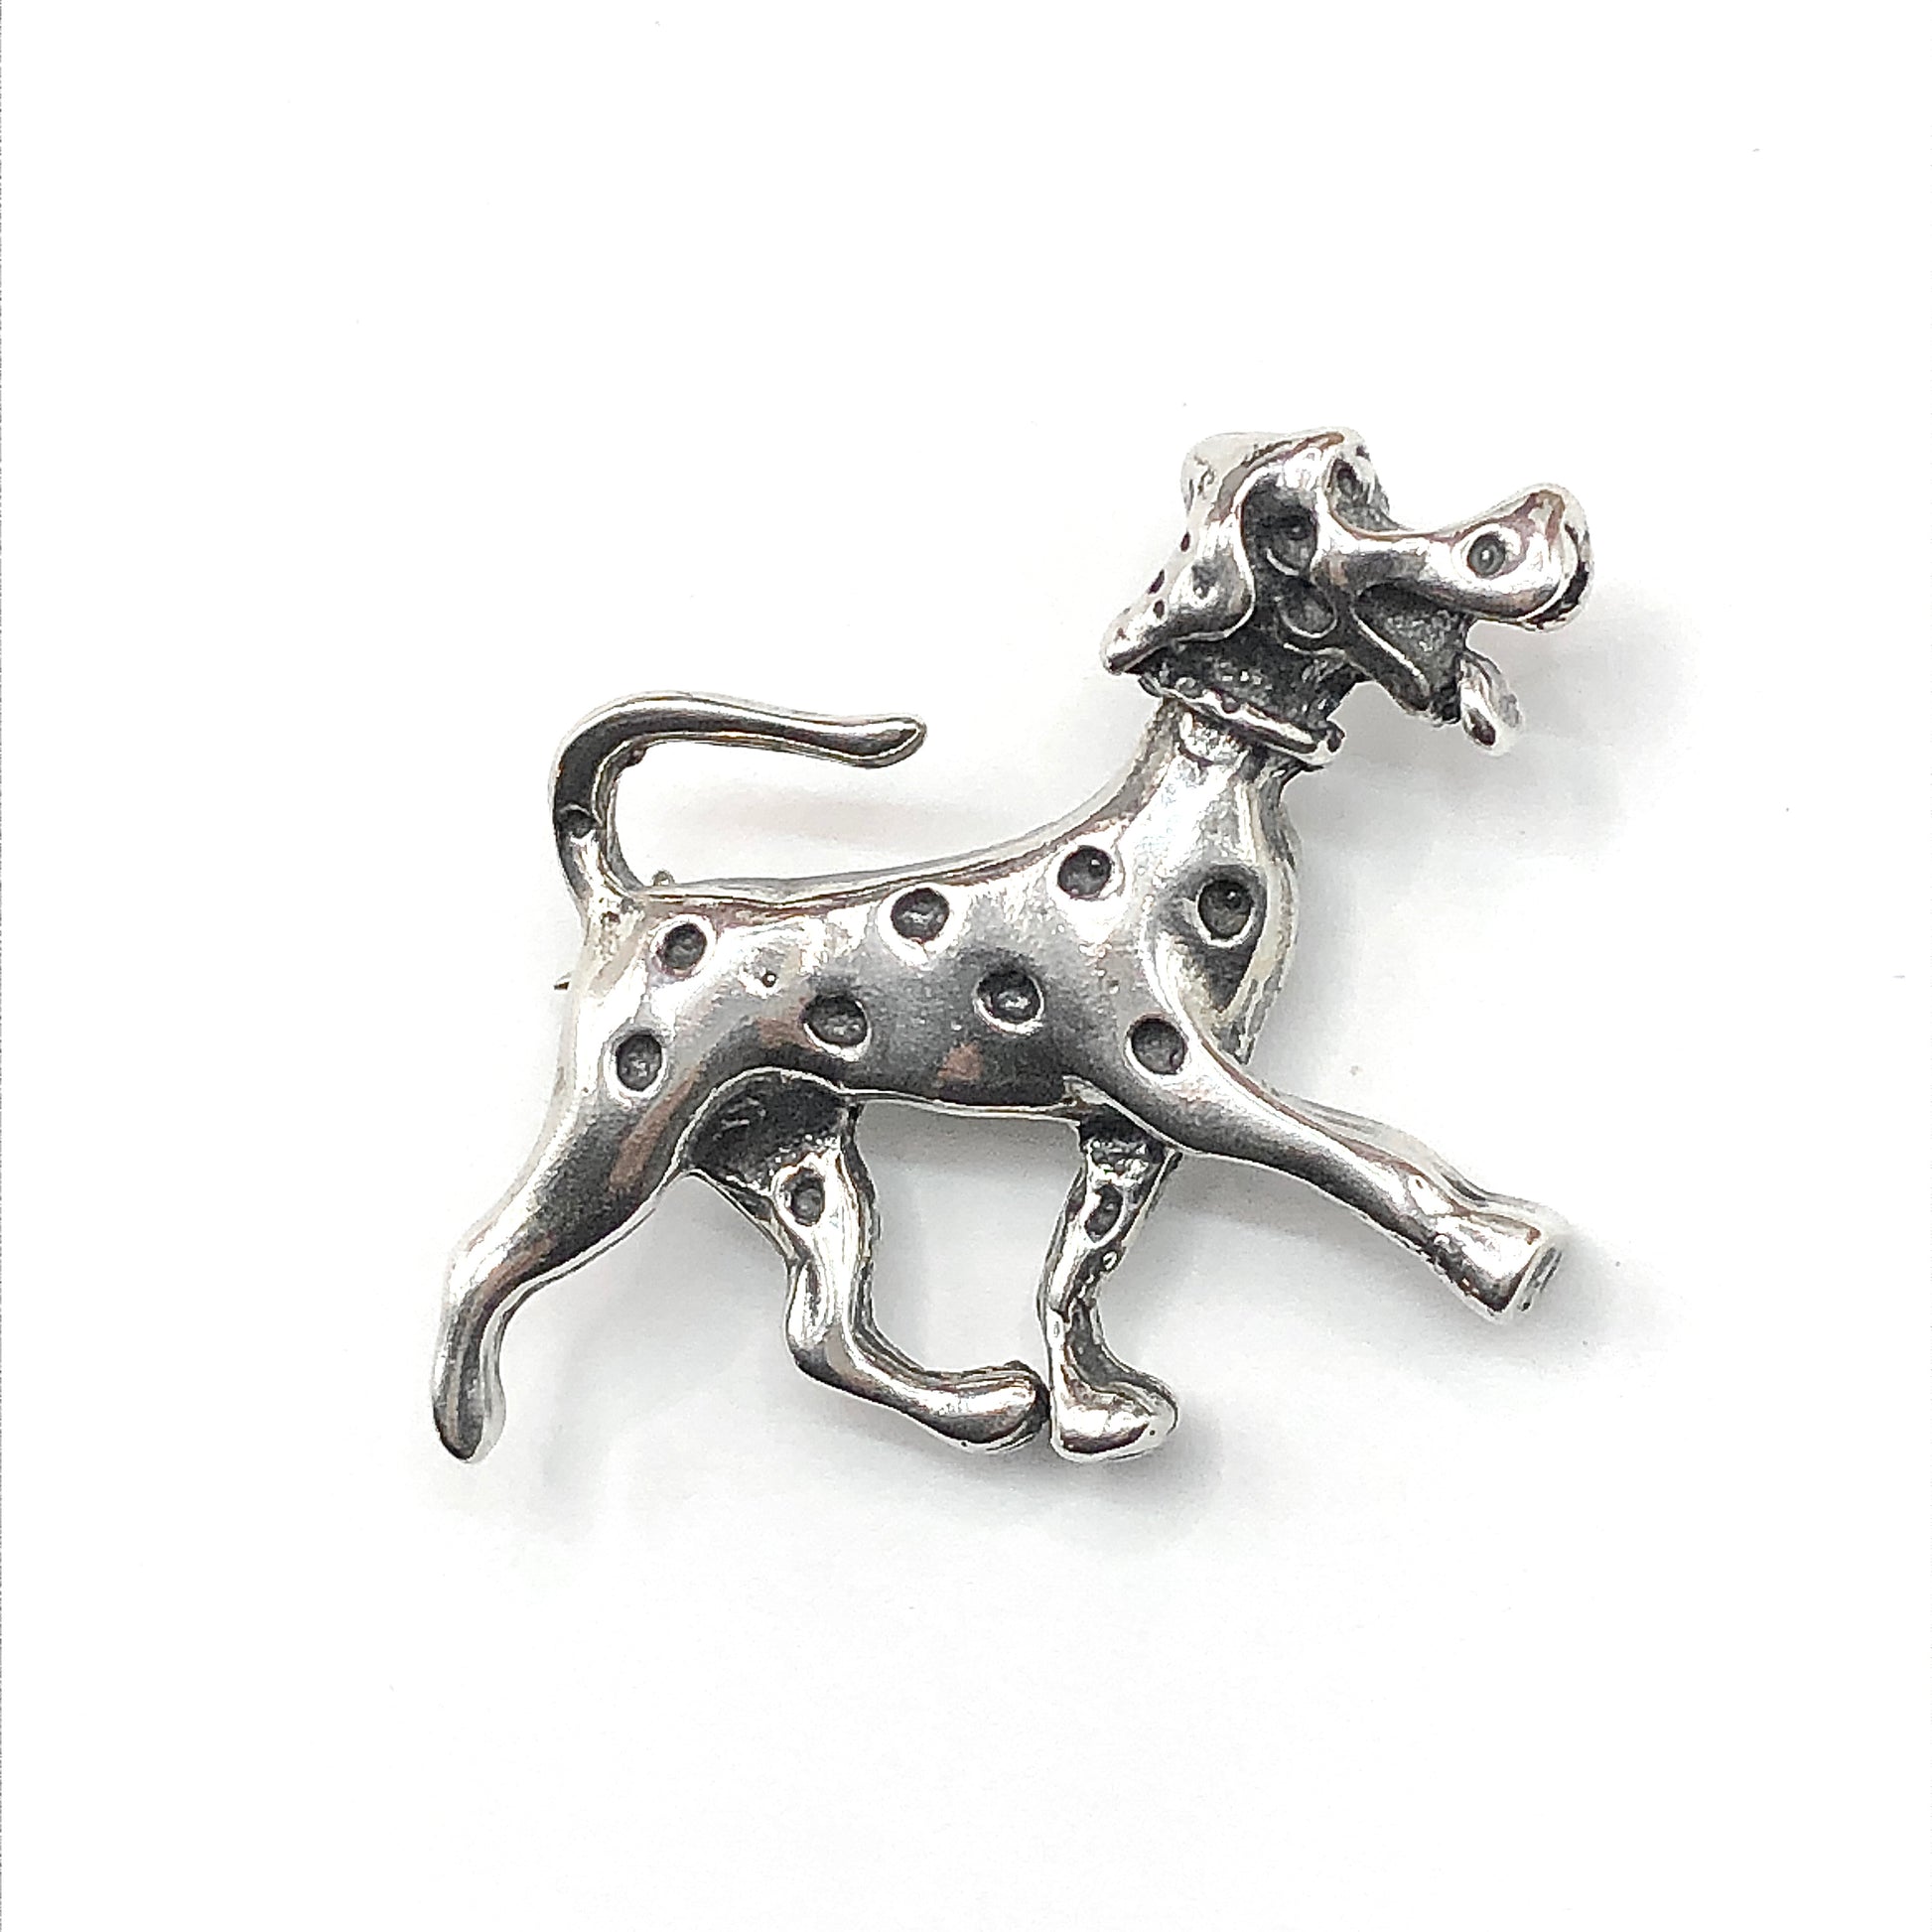 Brooches & Lapel Pins Mens Womens - Sterling Silver Estate Dopey Dalmatian Dog Brooch - Fireman's Friend Pin - Cartoon Style